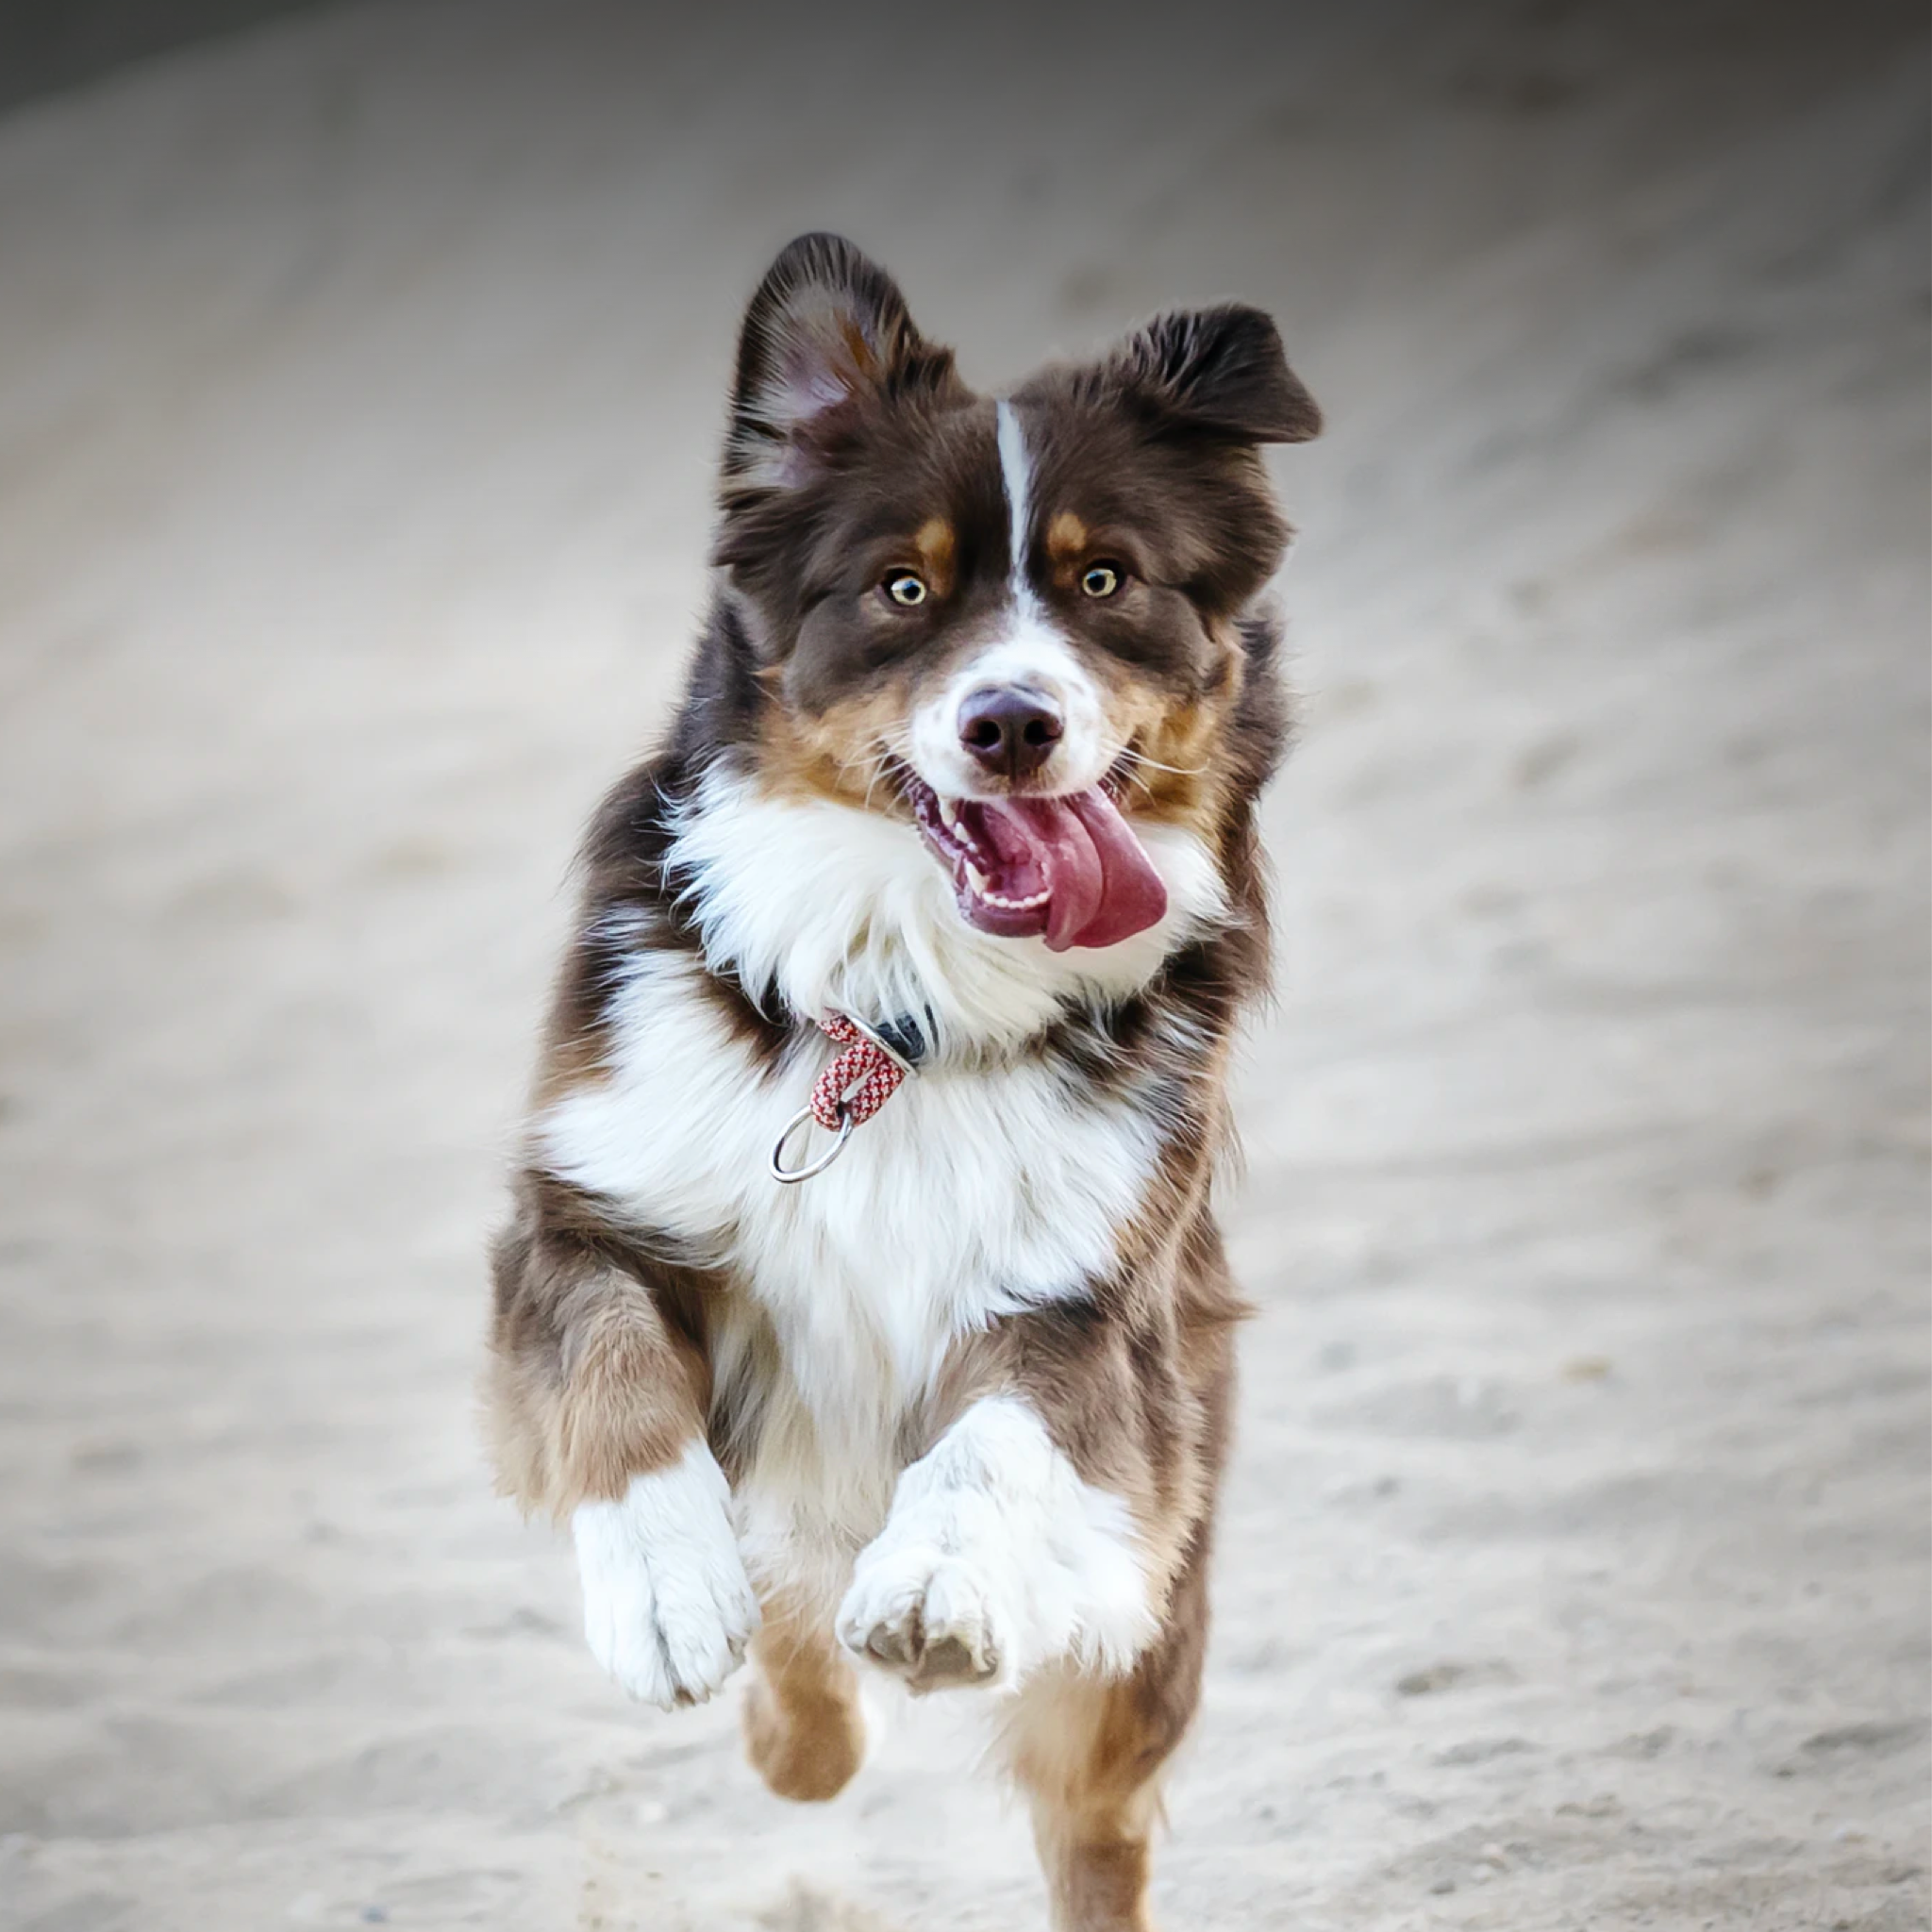 An excited Australian Shepherd runs free in the outdoors